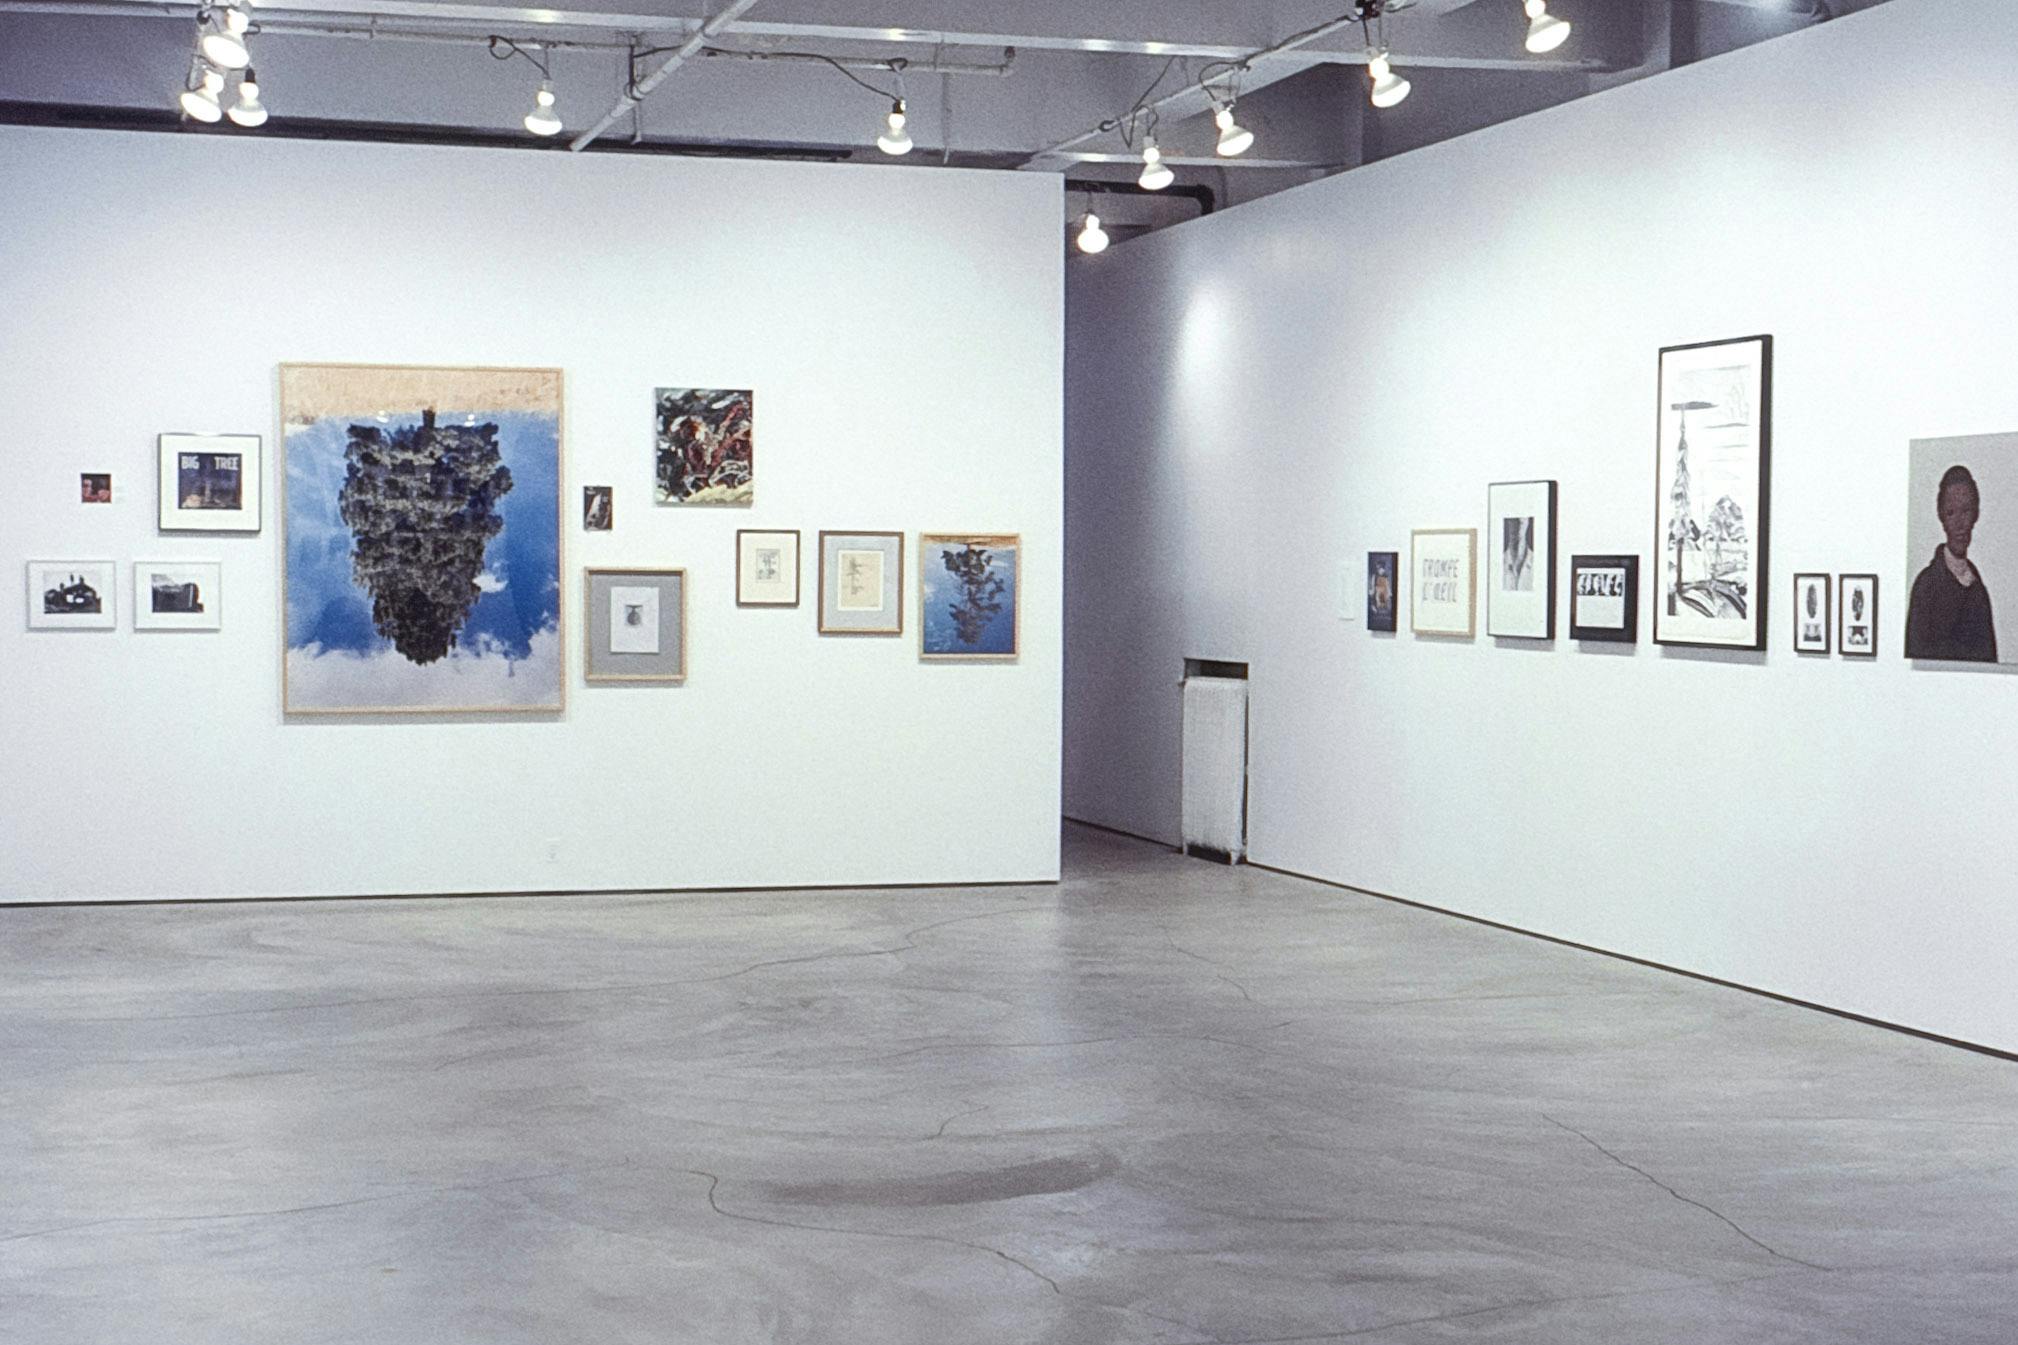 Two walls and a darkened hallway in a gallery space. The walls contain several artworks of different sizes. Two works of different sizes are upside-down photos of trees in front of blue skies. 